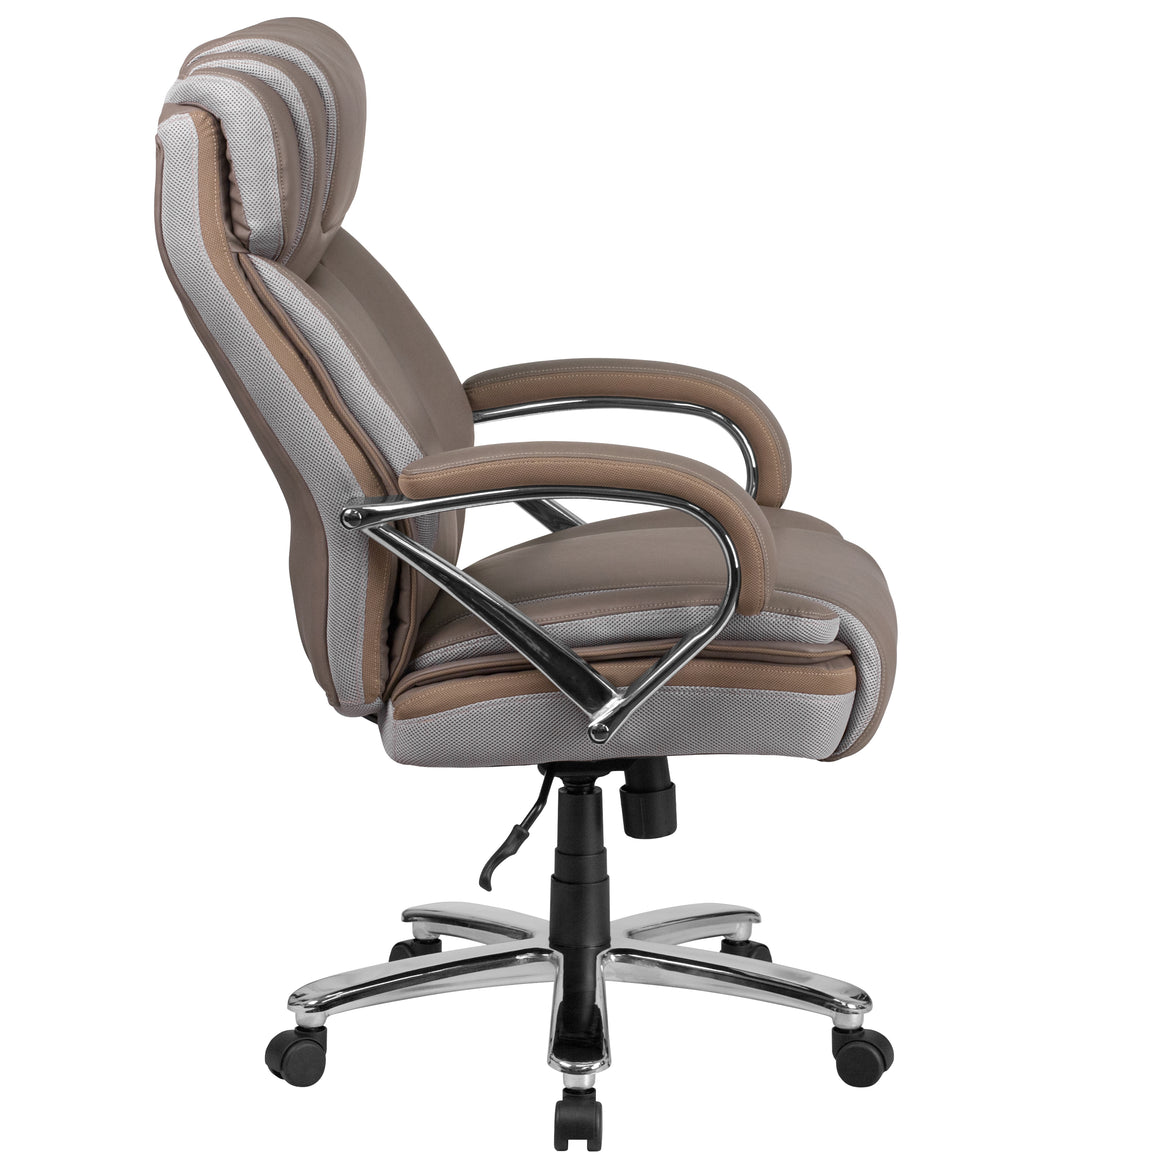 Hercules 500 LB. Capacity Big & Tall Taupe Leather Office Chair - Man Cave Boutique